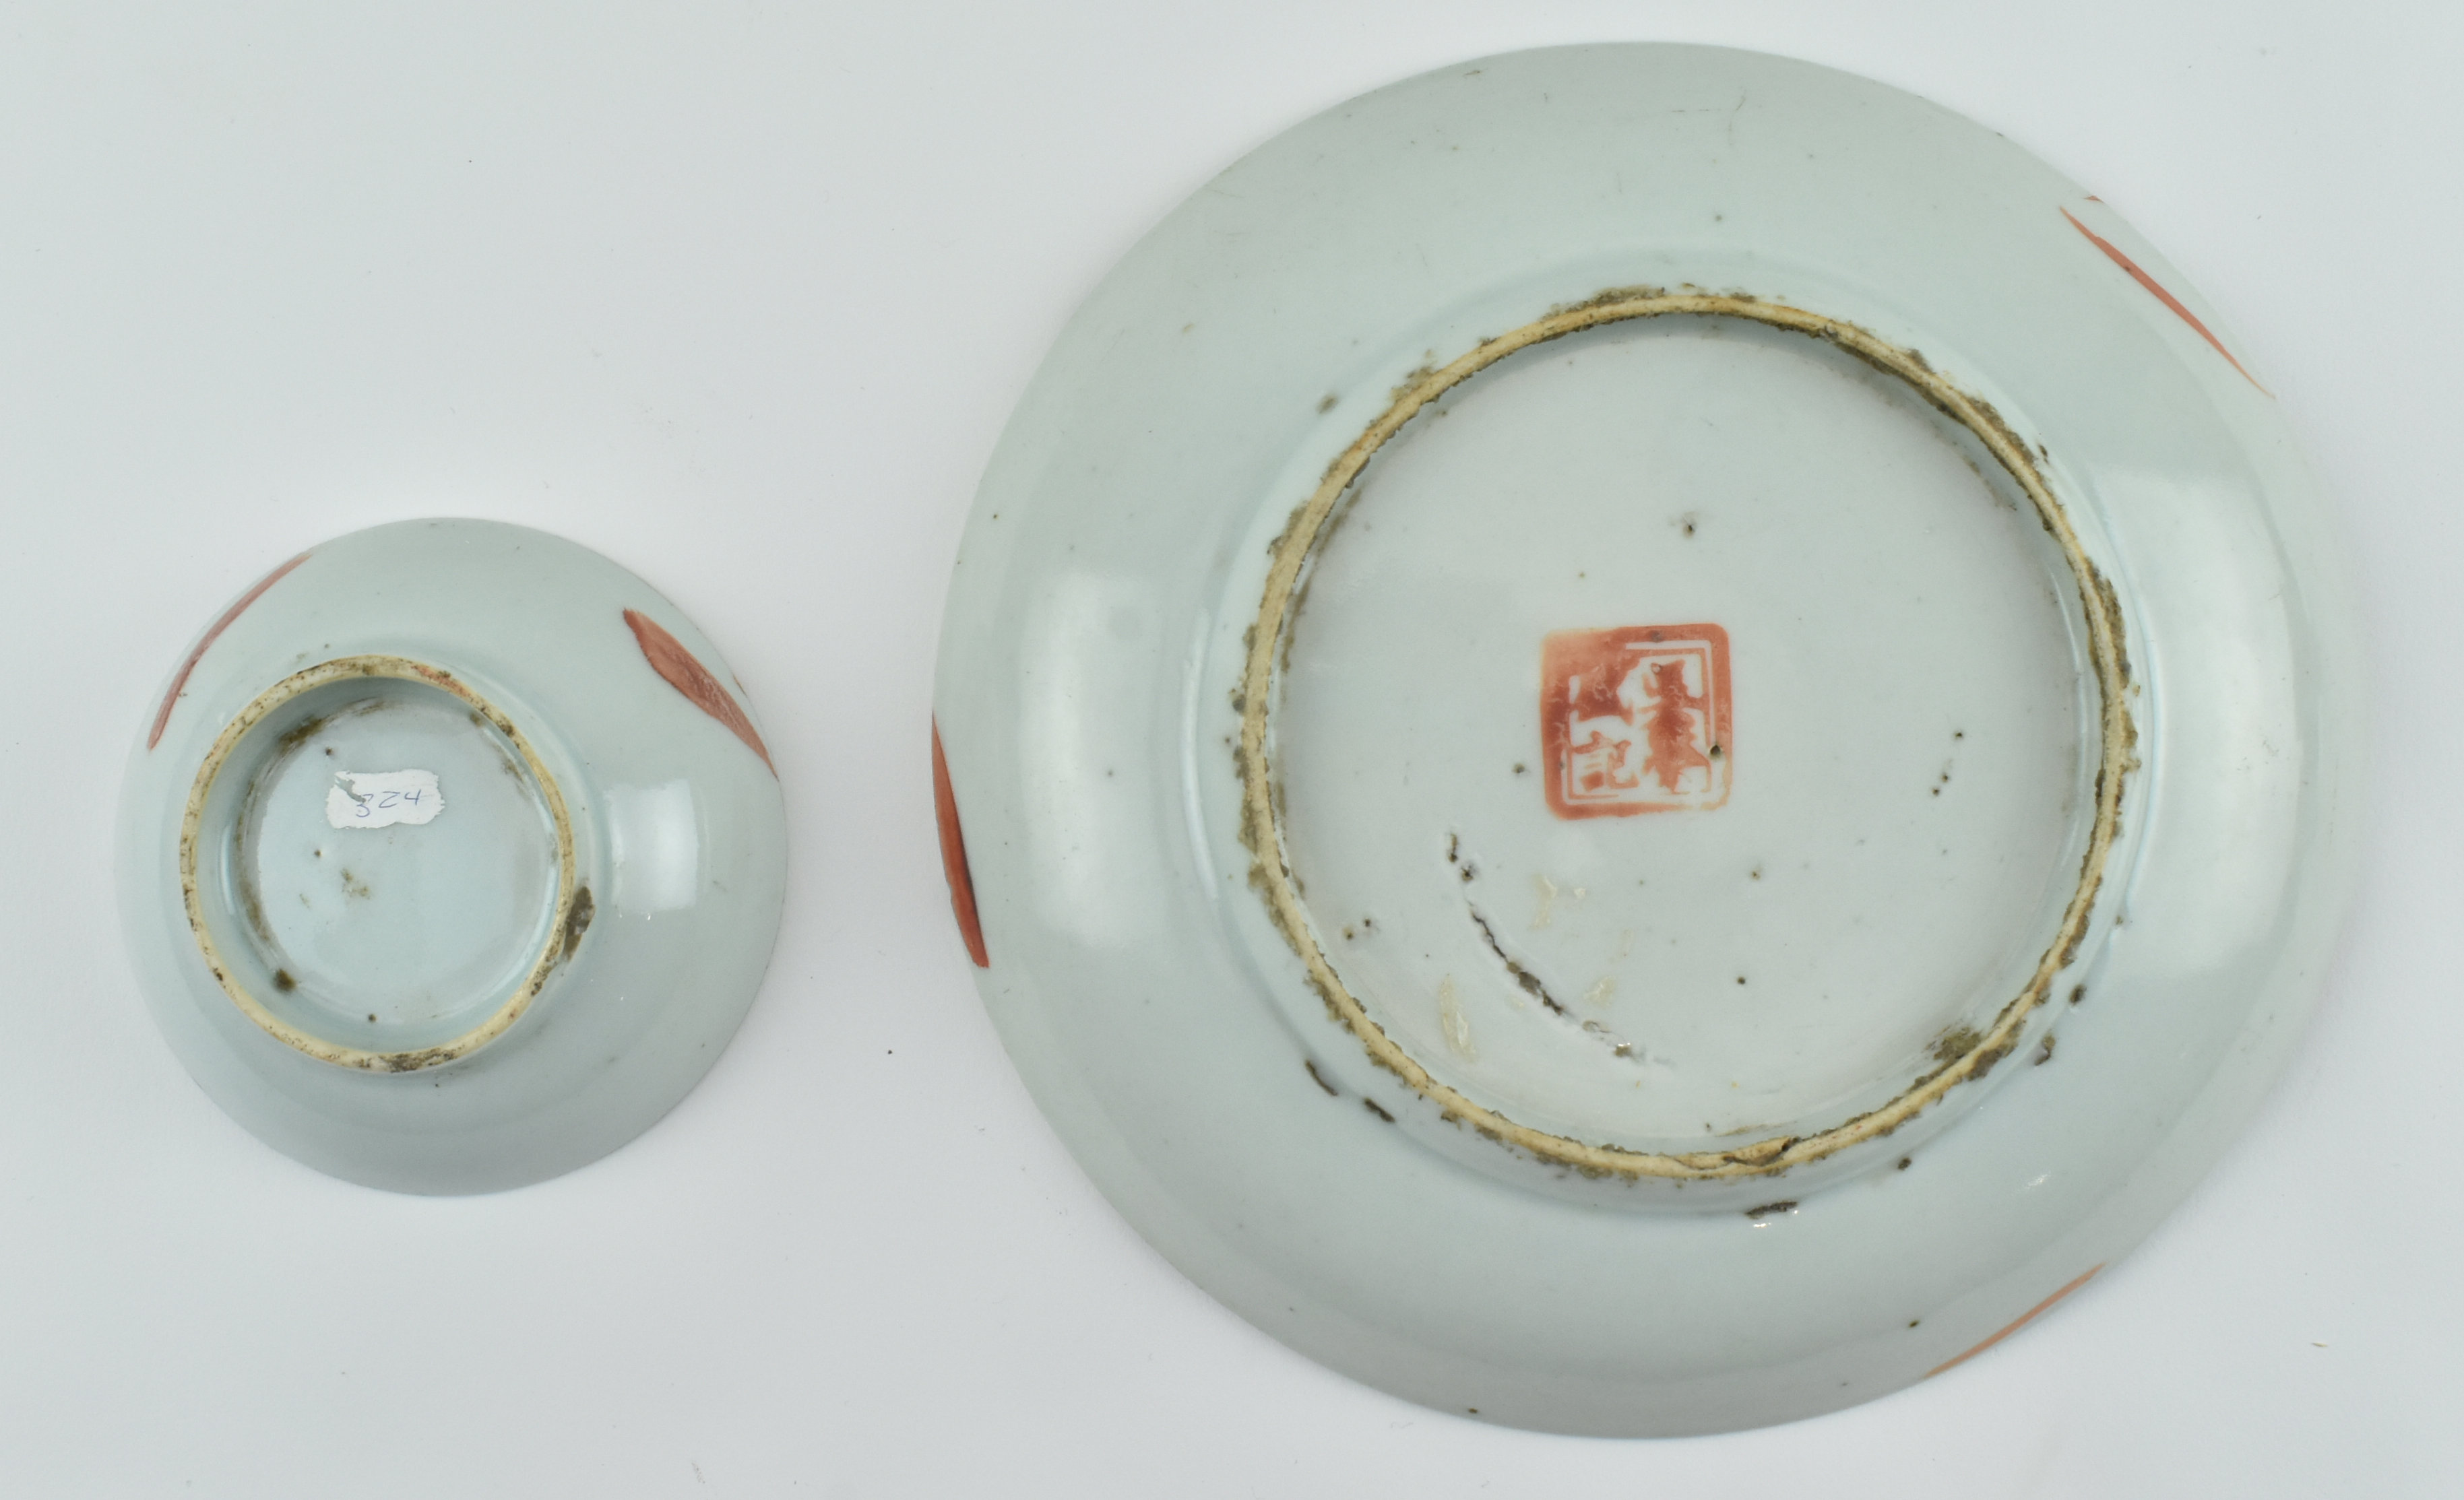 GROUP OF 4 GUANGXU "SAN DUO" CUPS AND PLATES 光绪 “三多”茶杯盘子 - Image 5 of 8